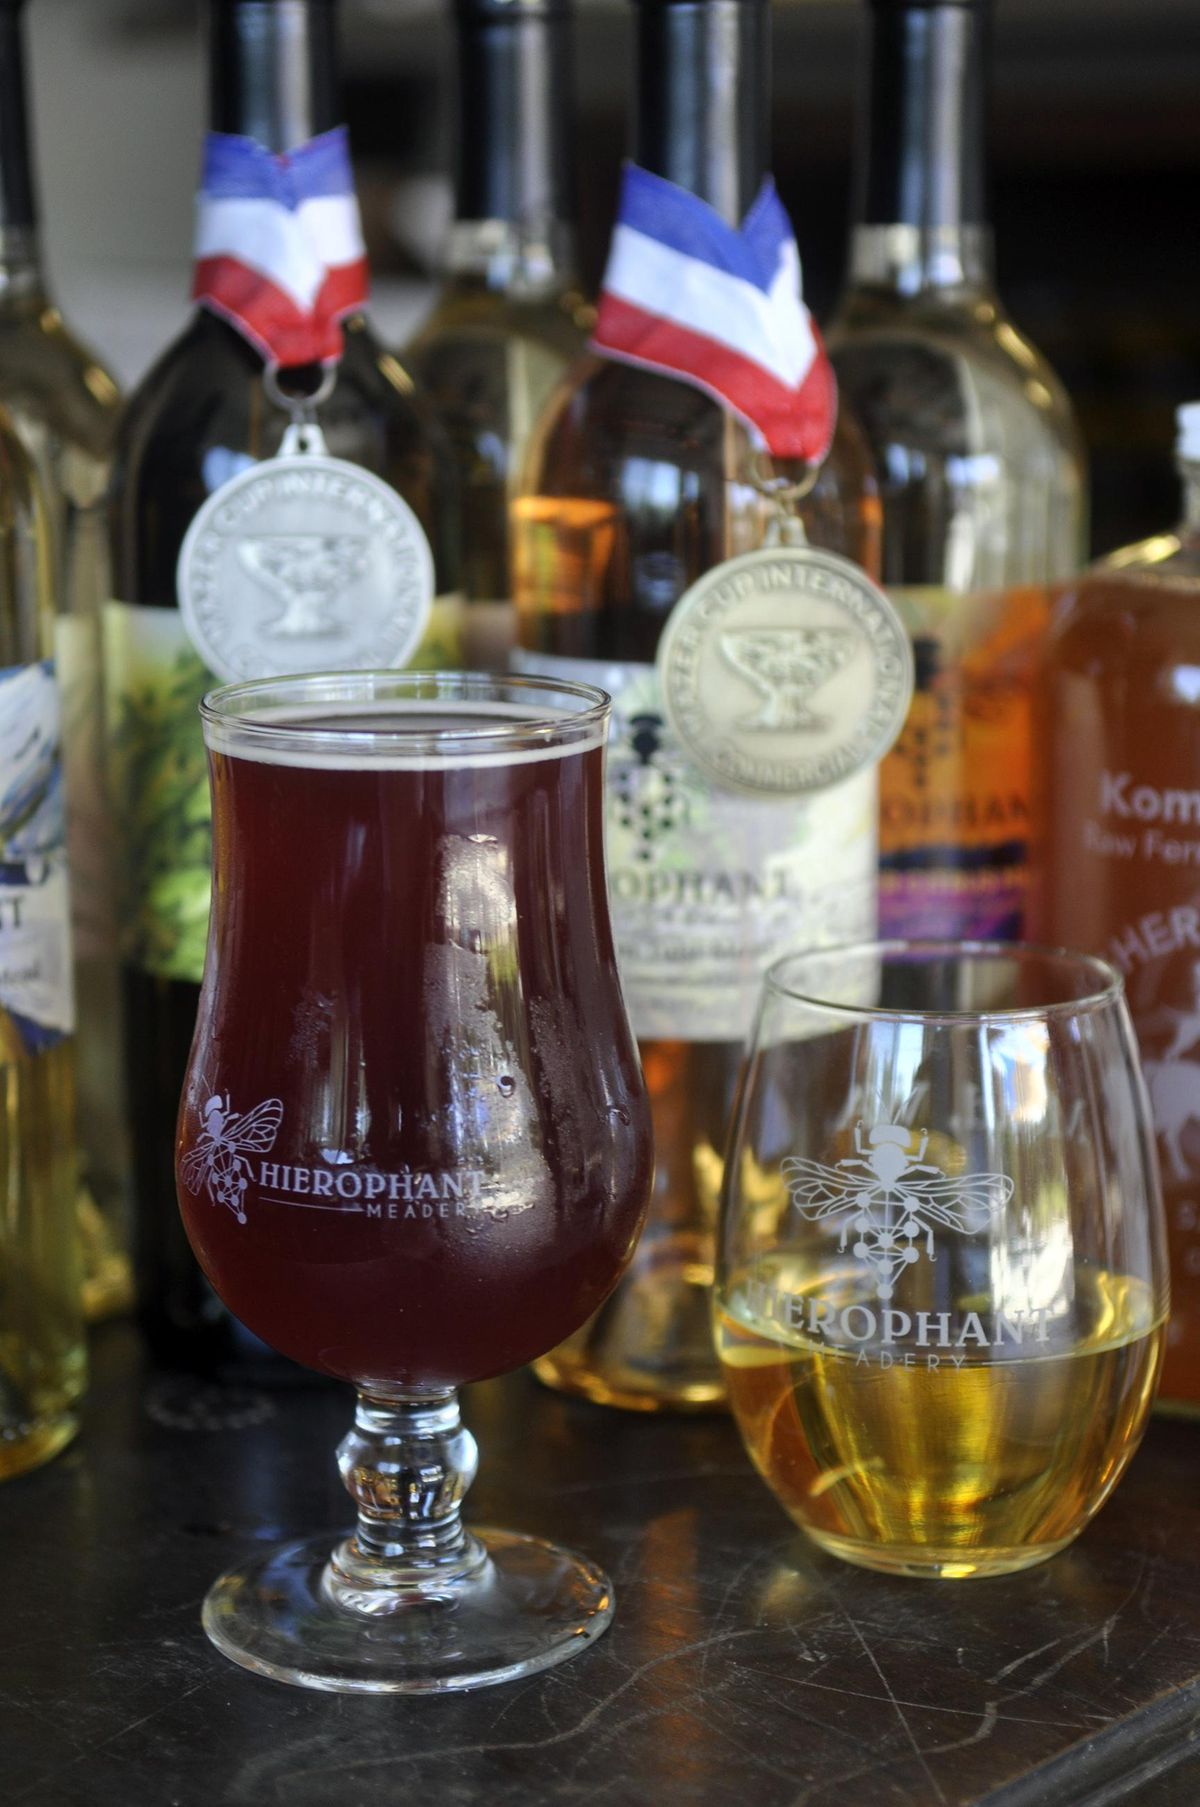 Hierophant Meadery has won several awards for its Zelena Hopped and Hawthorn Tulsi meads. Plus, last summer Seattle Magazine named Hierophant